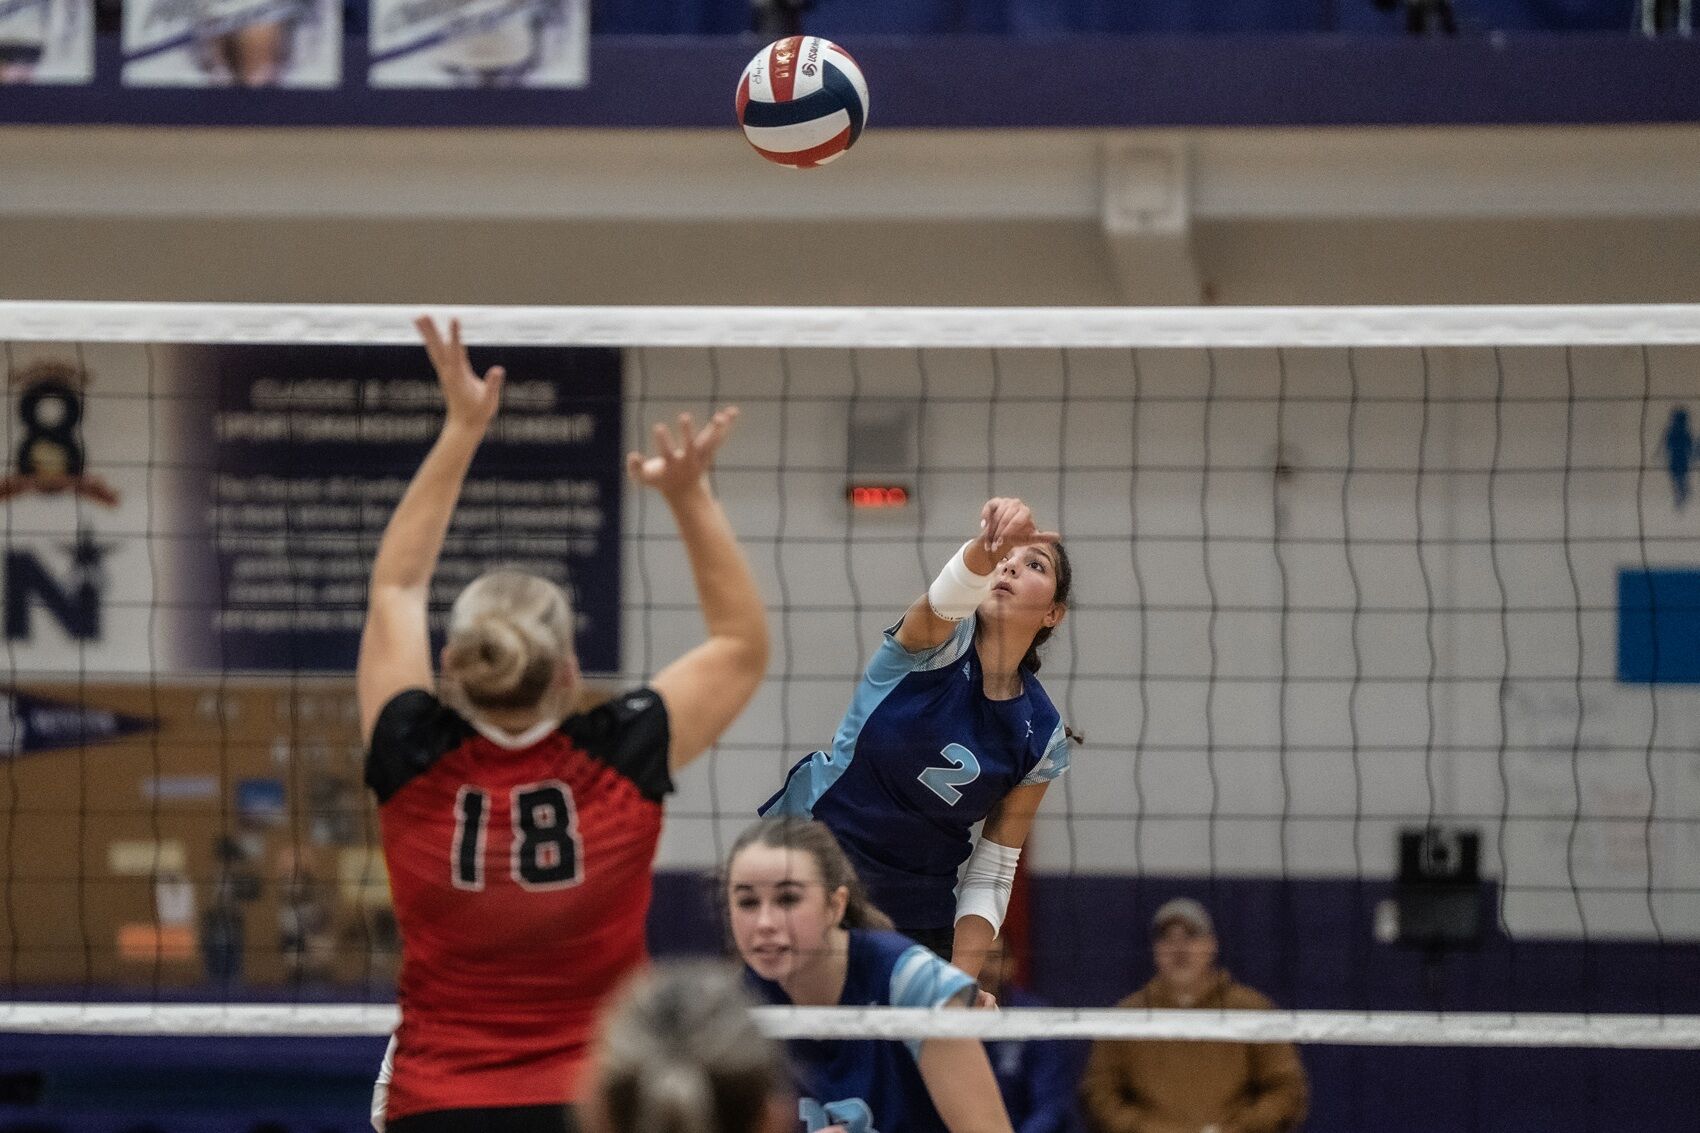 Waukesha North stages impressive comeback to sweep Waukesha South in volleyball match